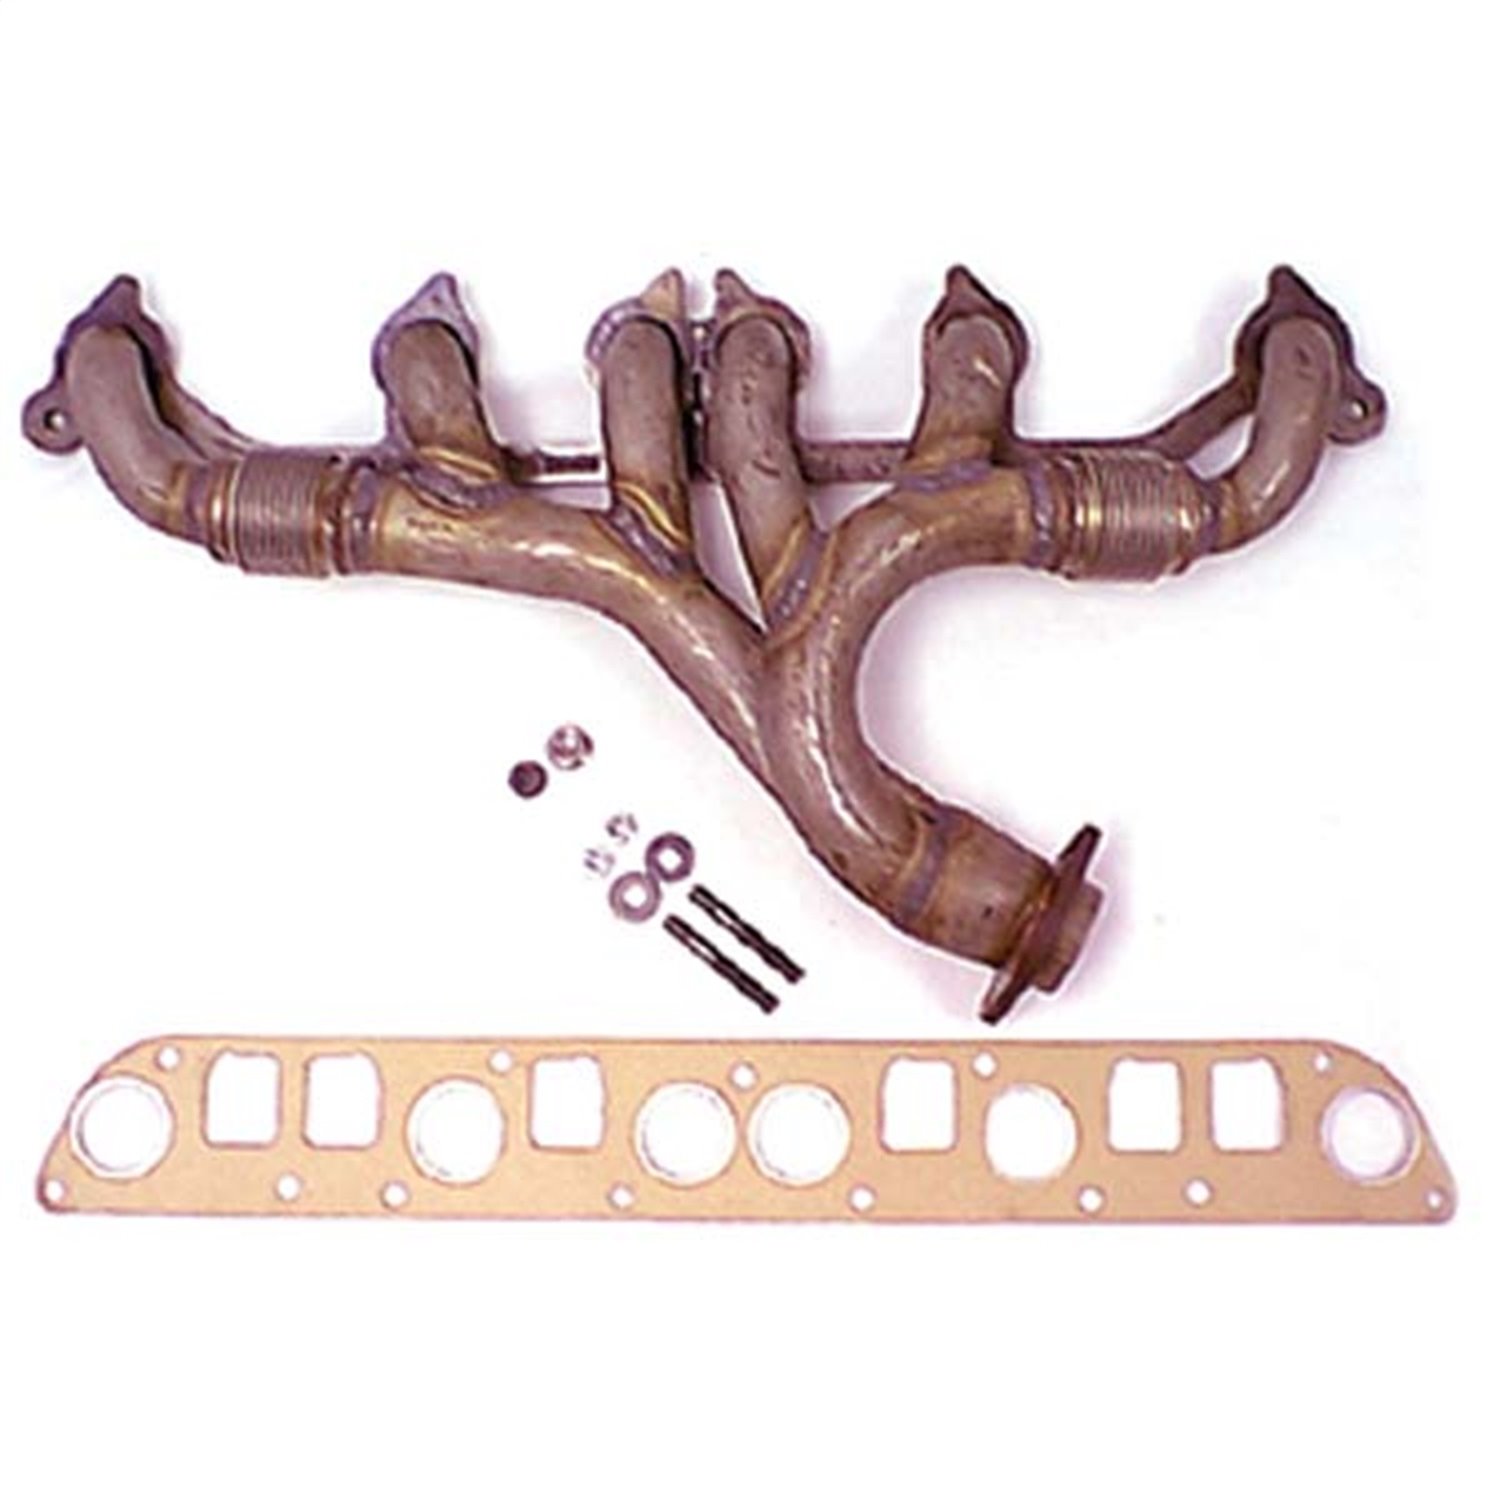 This exhaust manifold kit from Omix-ADA fits 91-99 Jeep Cherokees & Wranglers and 93-98 Grand Cherokees with a 4.0 liter engine